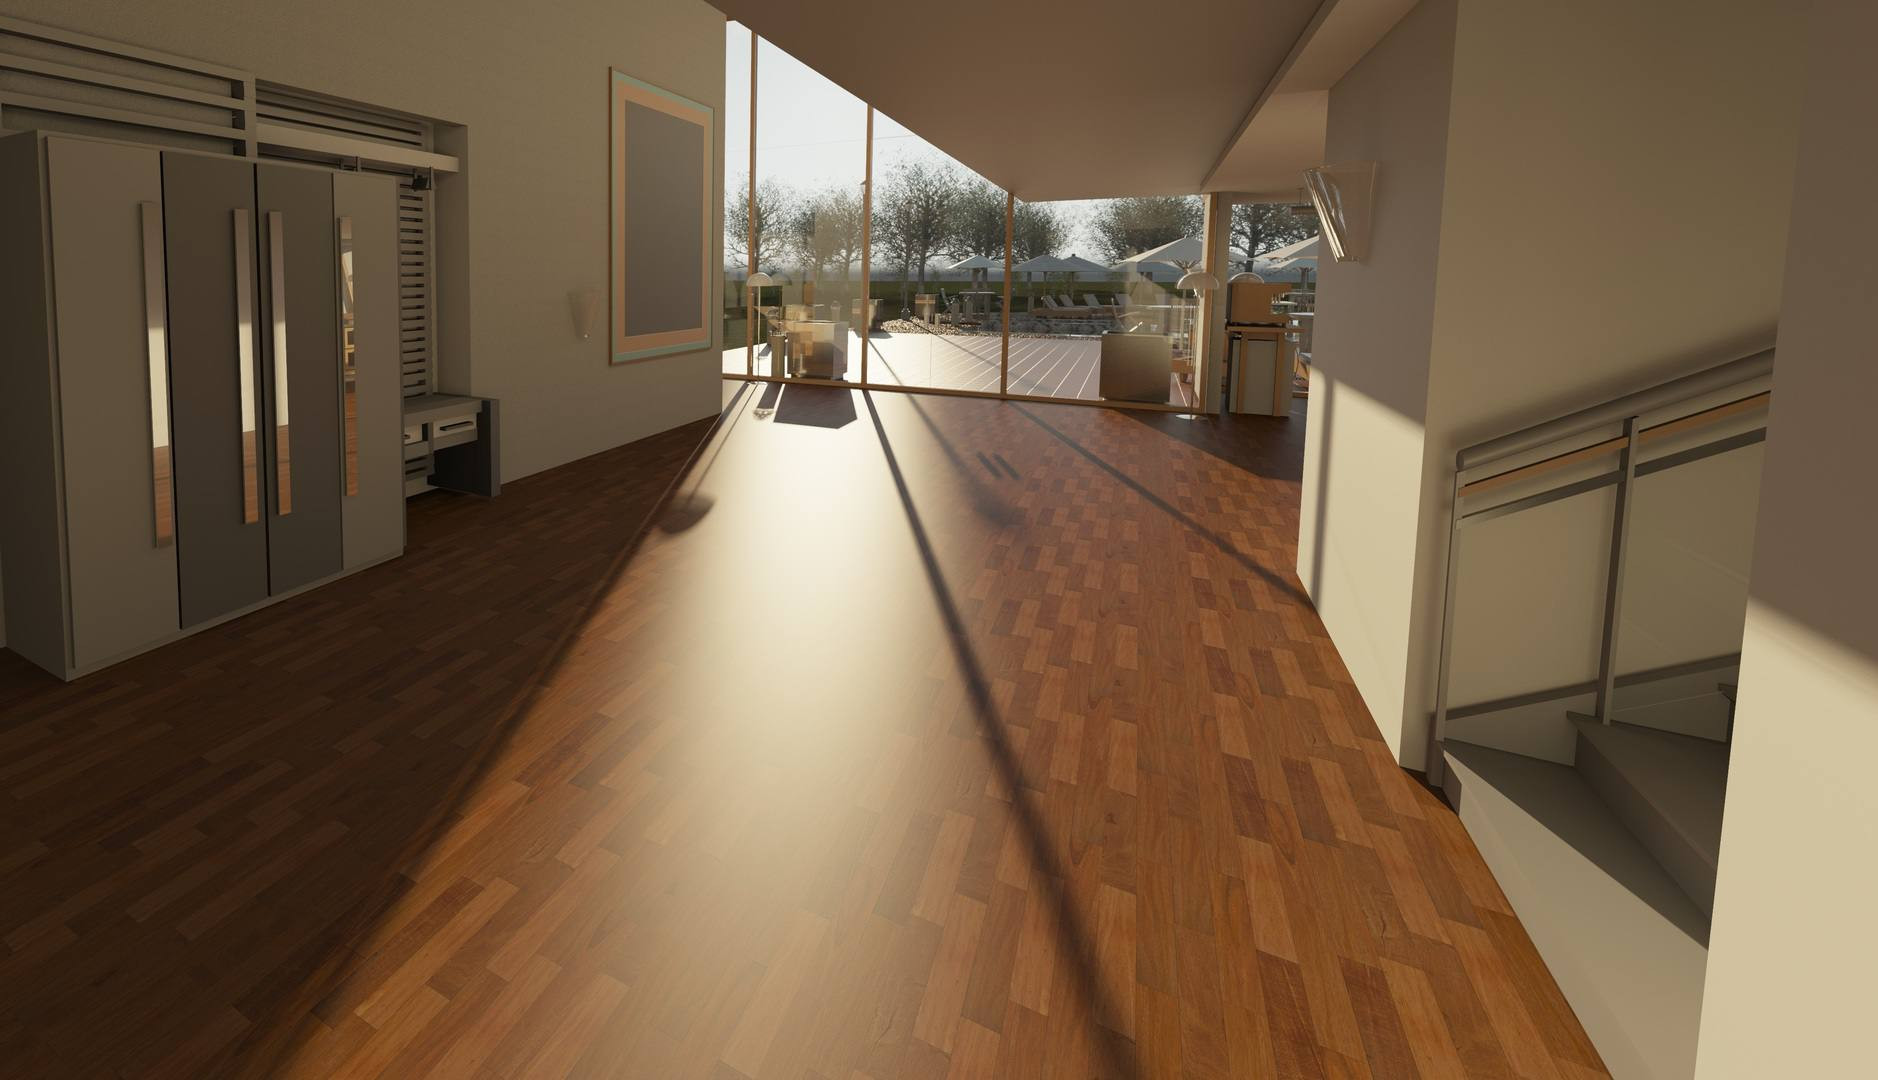 21 attractive How to Estimate Hardwood Floor Installation 2024 free download how to estimate hardwood floor installation of common flooring types currently used in renovation and building in architecture wood house floor interior window 917178 pxhere com 5ba27a2cc9e7